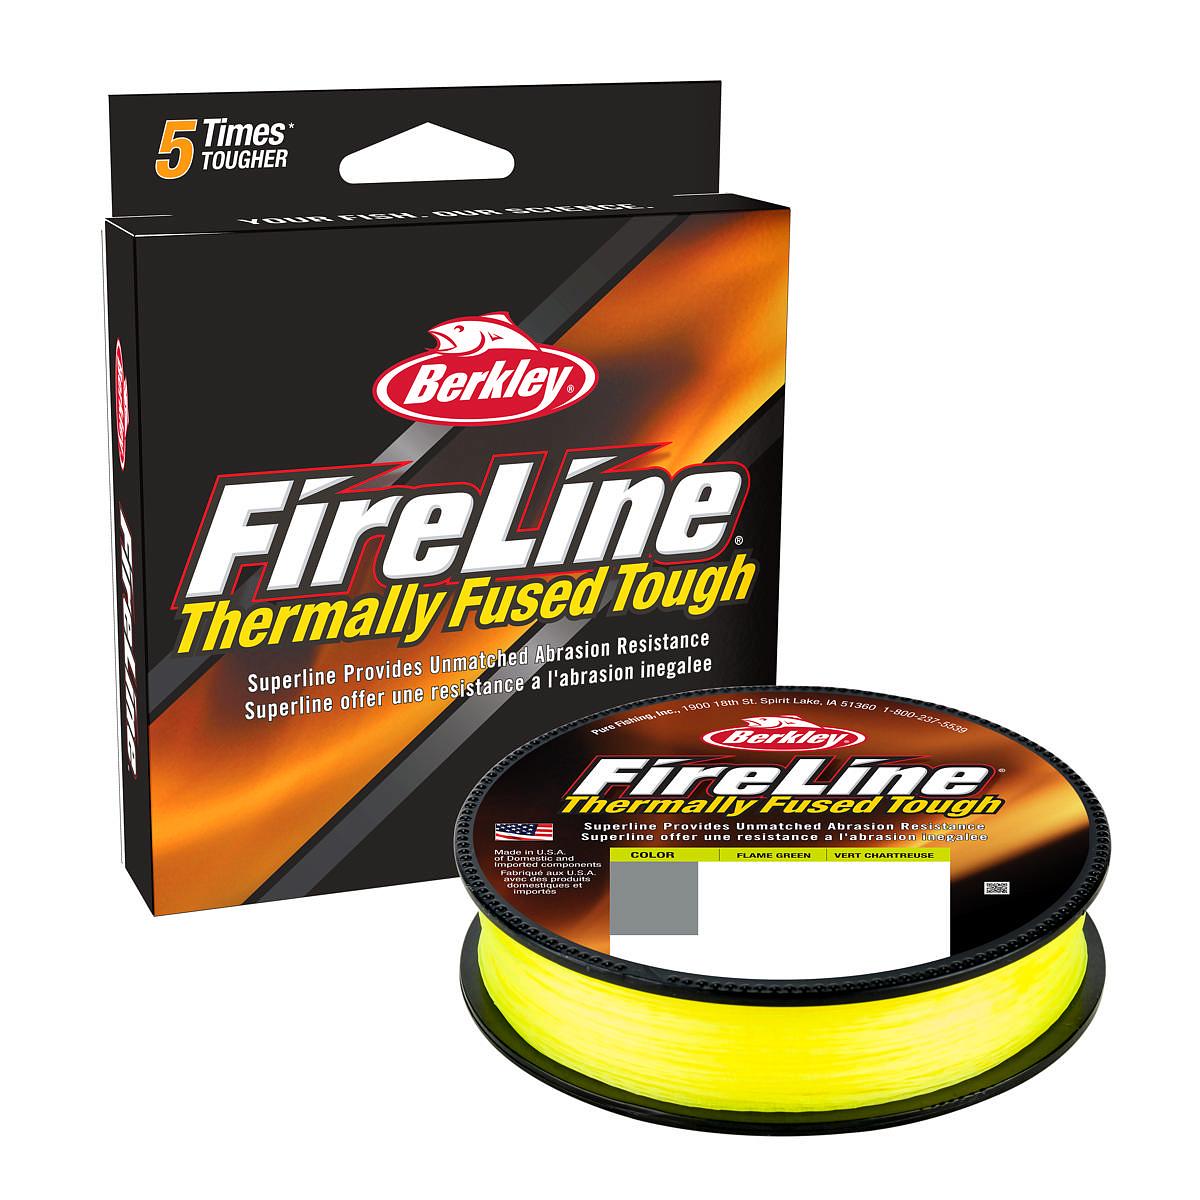 Berkley FireLine Superline Flame Green 17lb 7.7kg 1500yd 1371m Fishing Line  Suitable for Freshwater Environments - 釣り